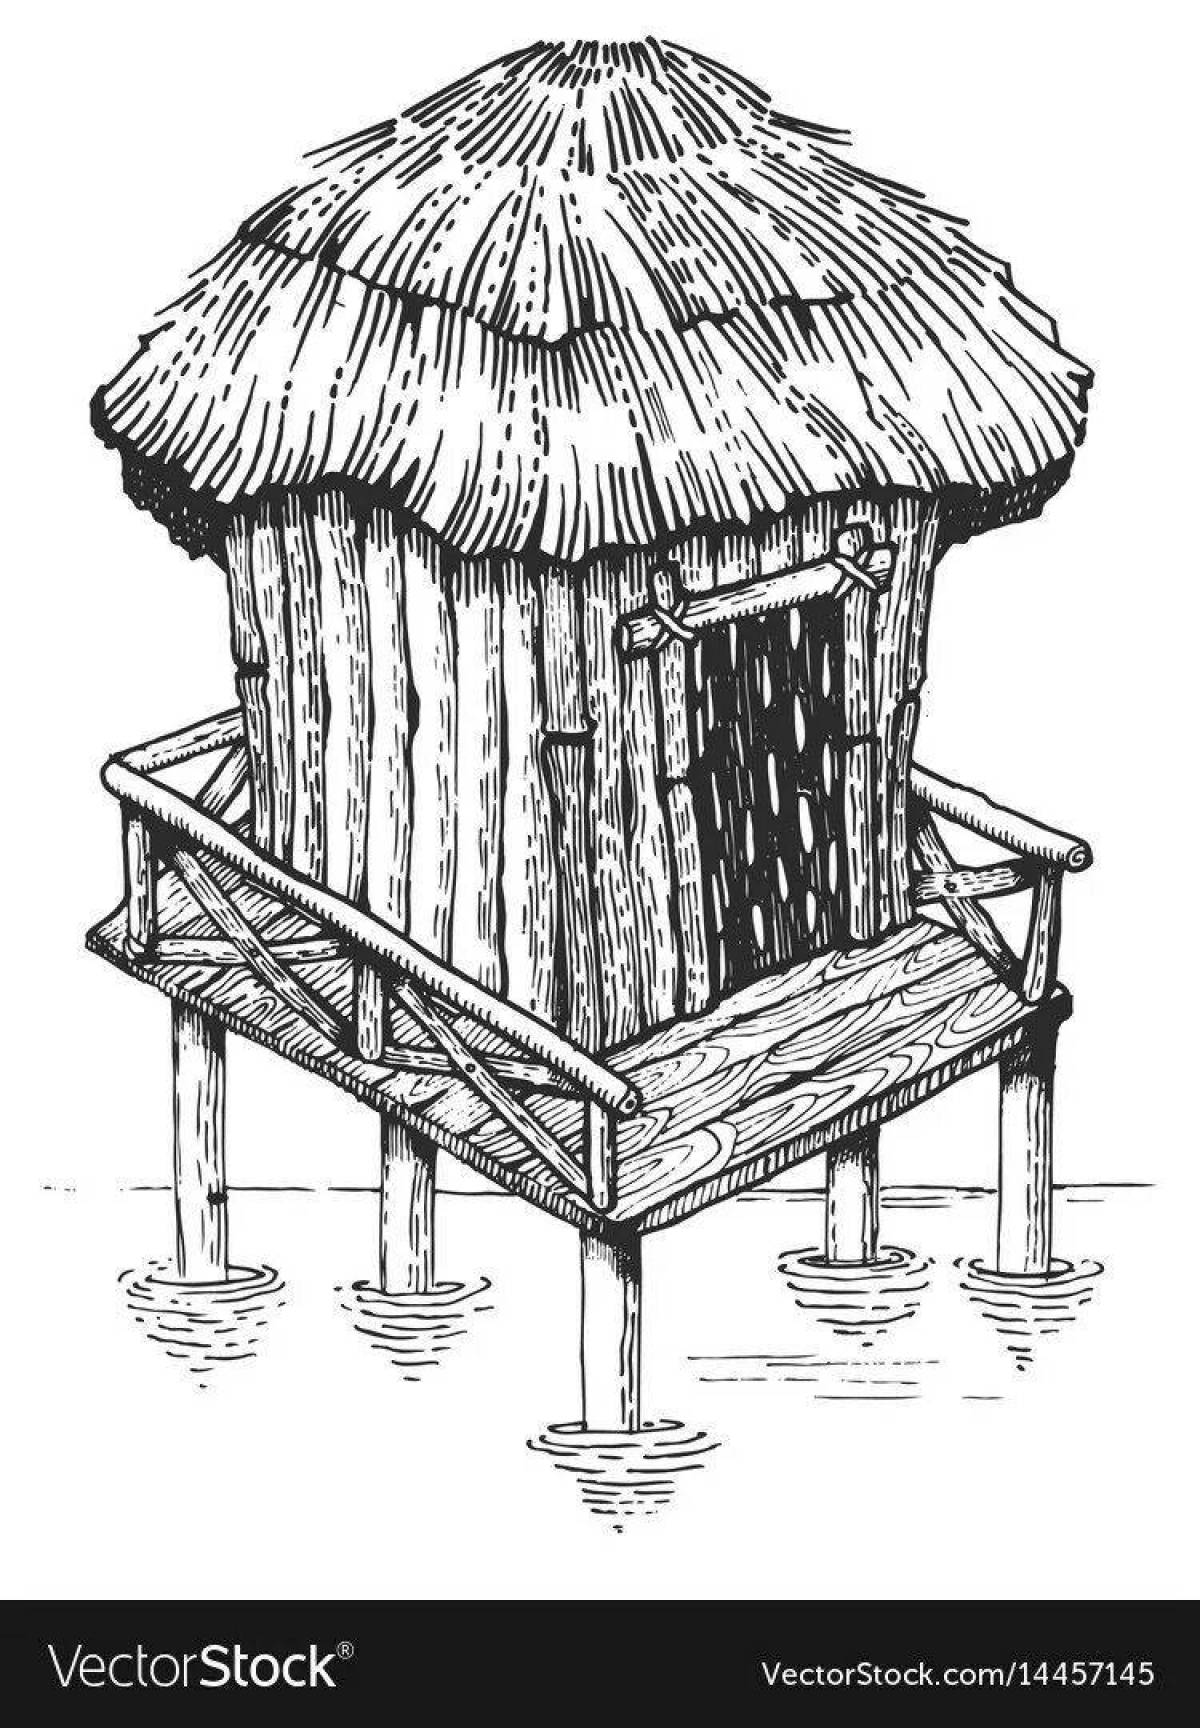 Adorable hut coloring page for kids